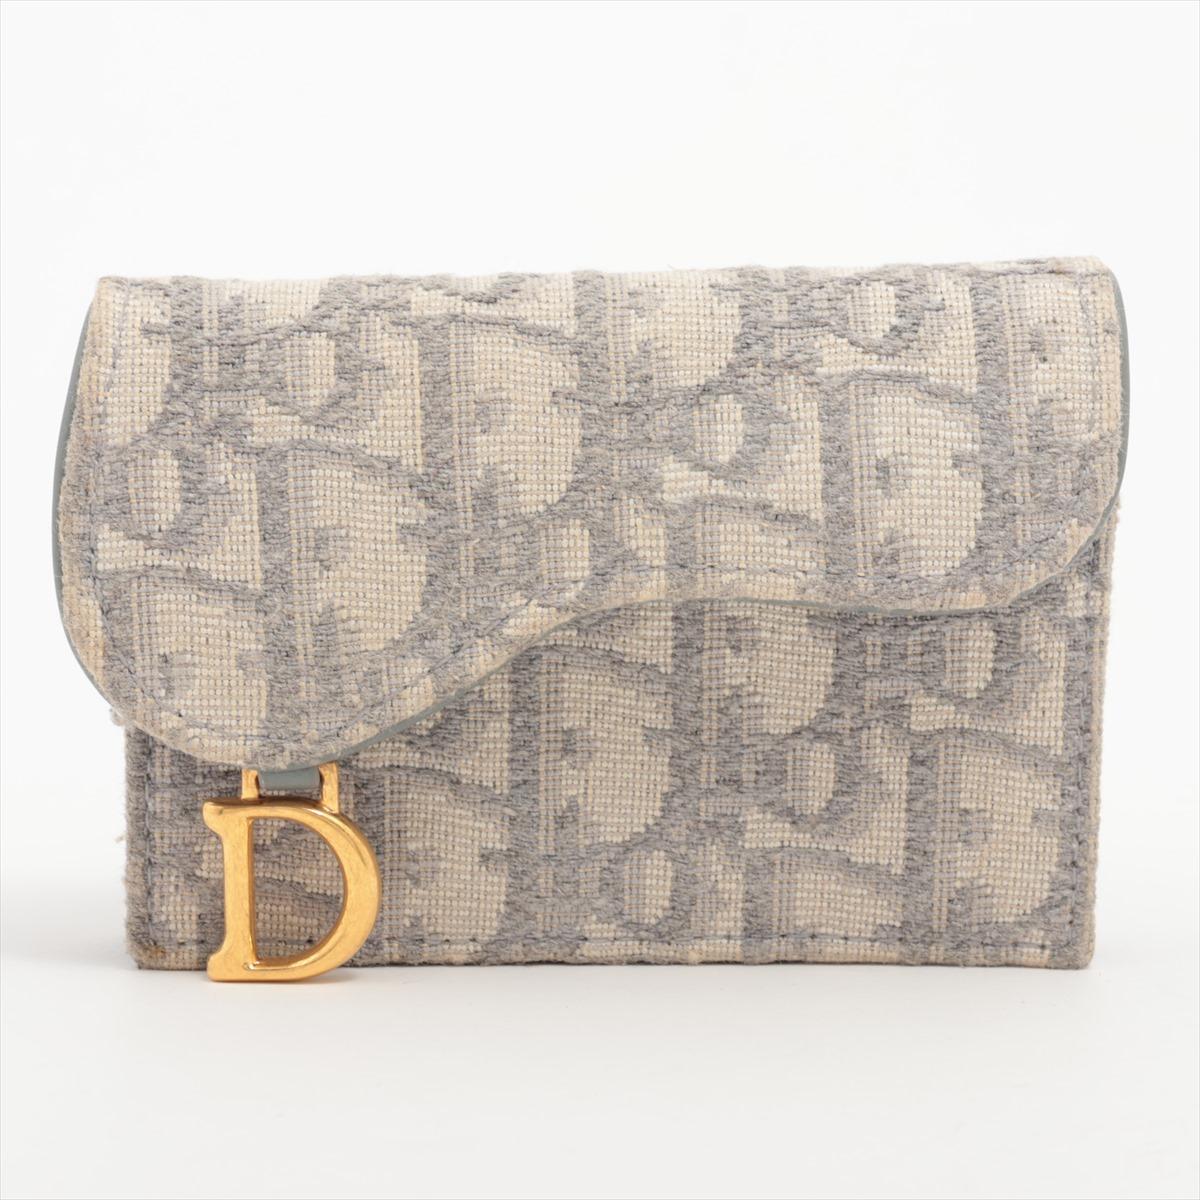 The Christian Dior Saddle Canvas & Leather Card Case in Grey is a sophisticated accessory that seamlessly merges style and practicality. Crafted with meticulous attention to detail, the card case features a combination of durable canvas and supple